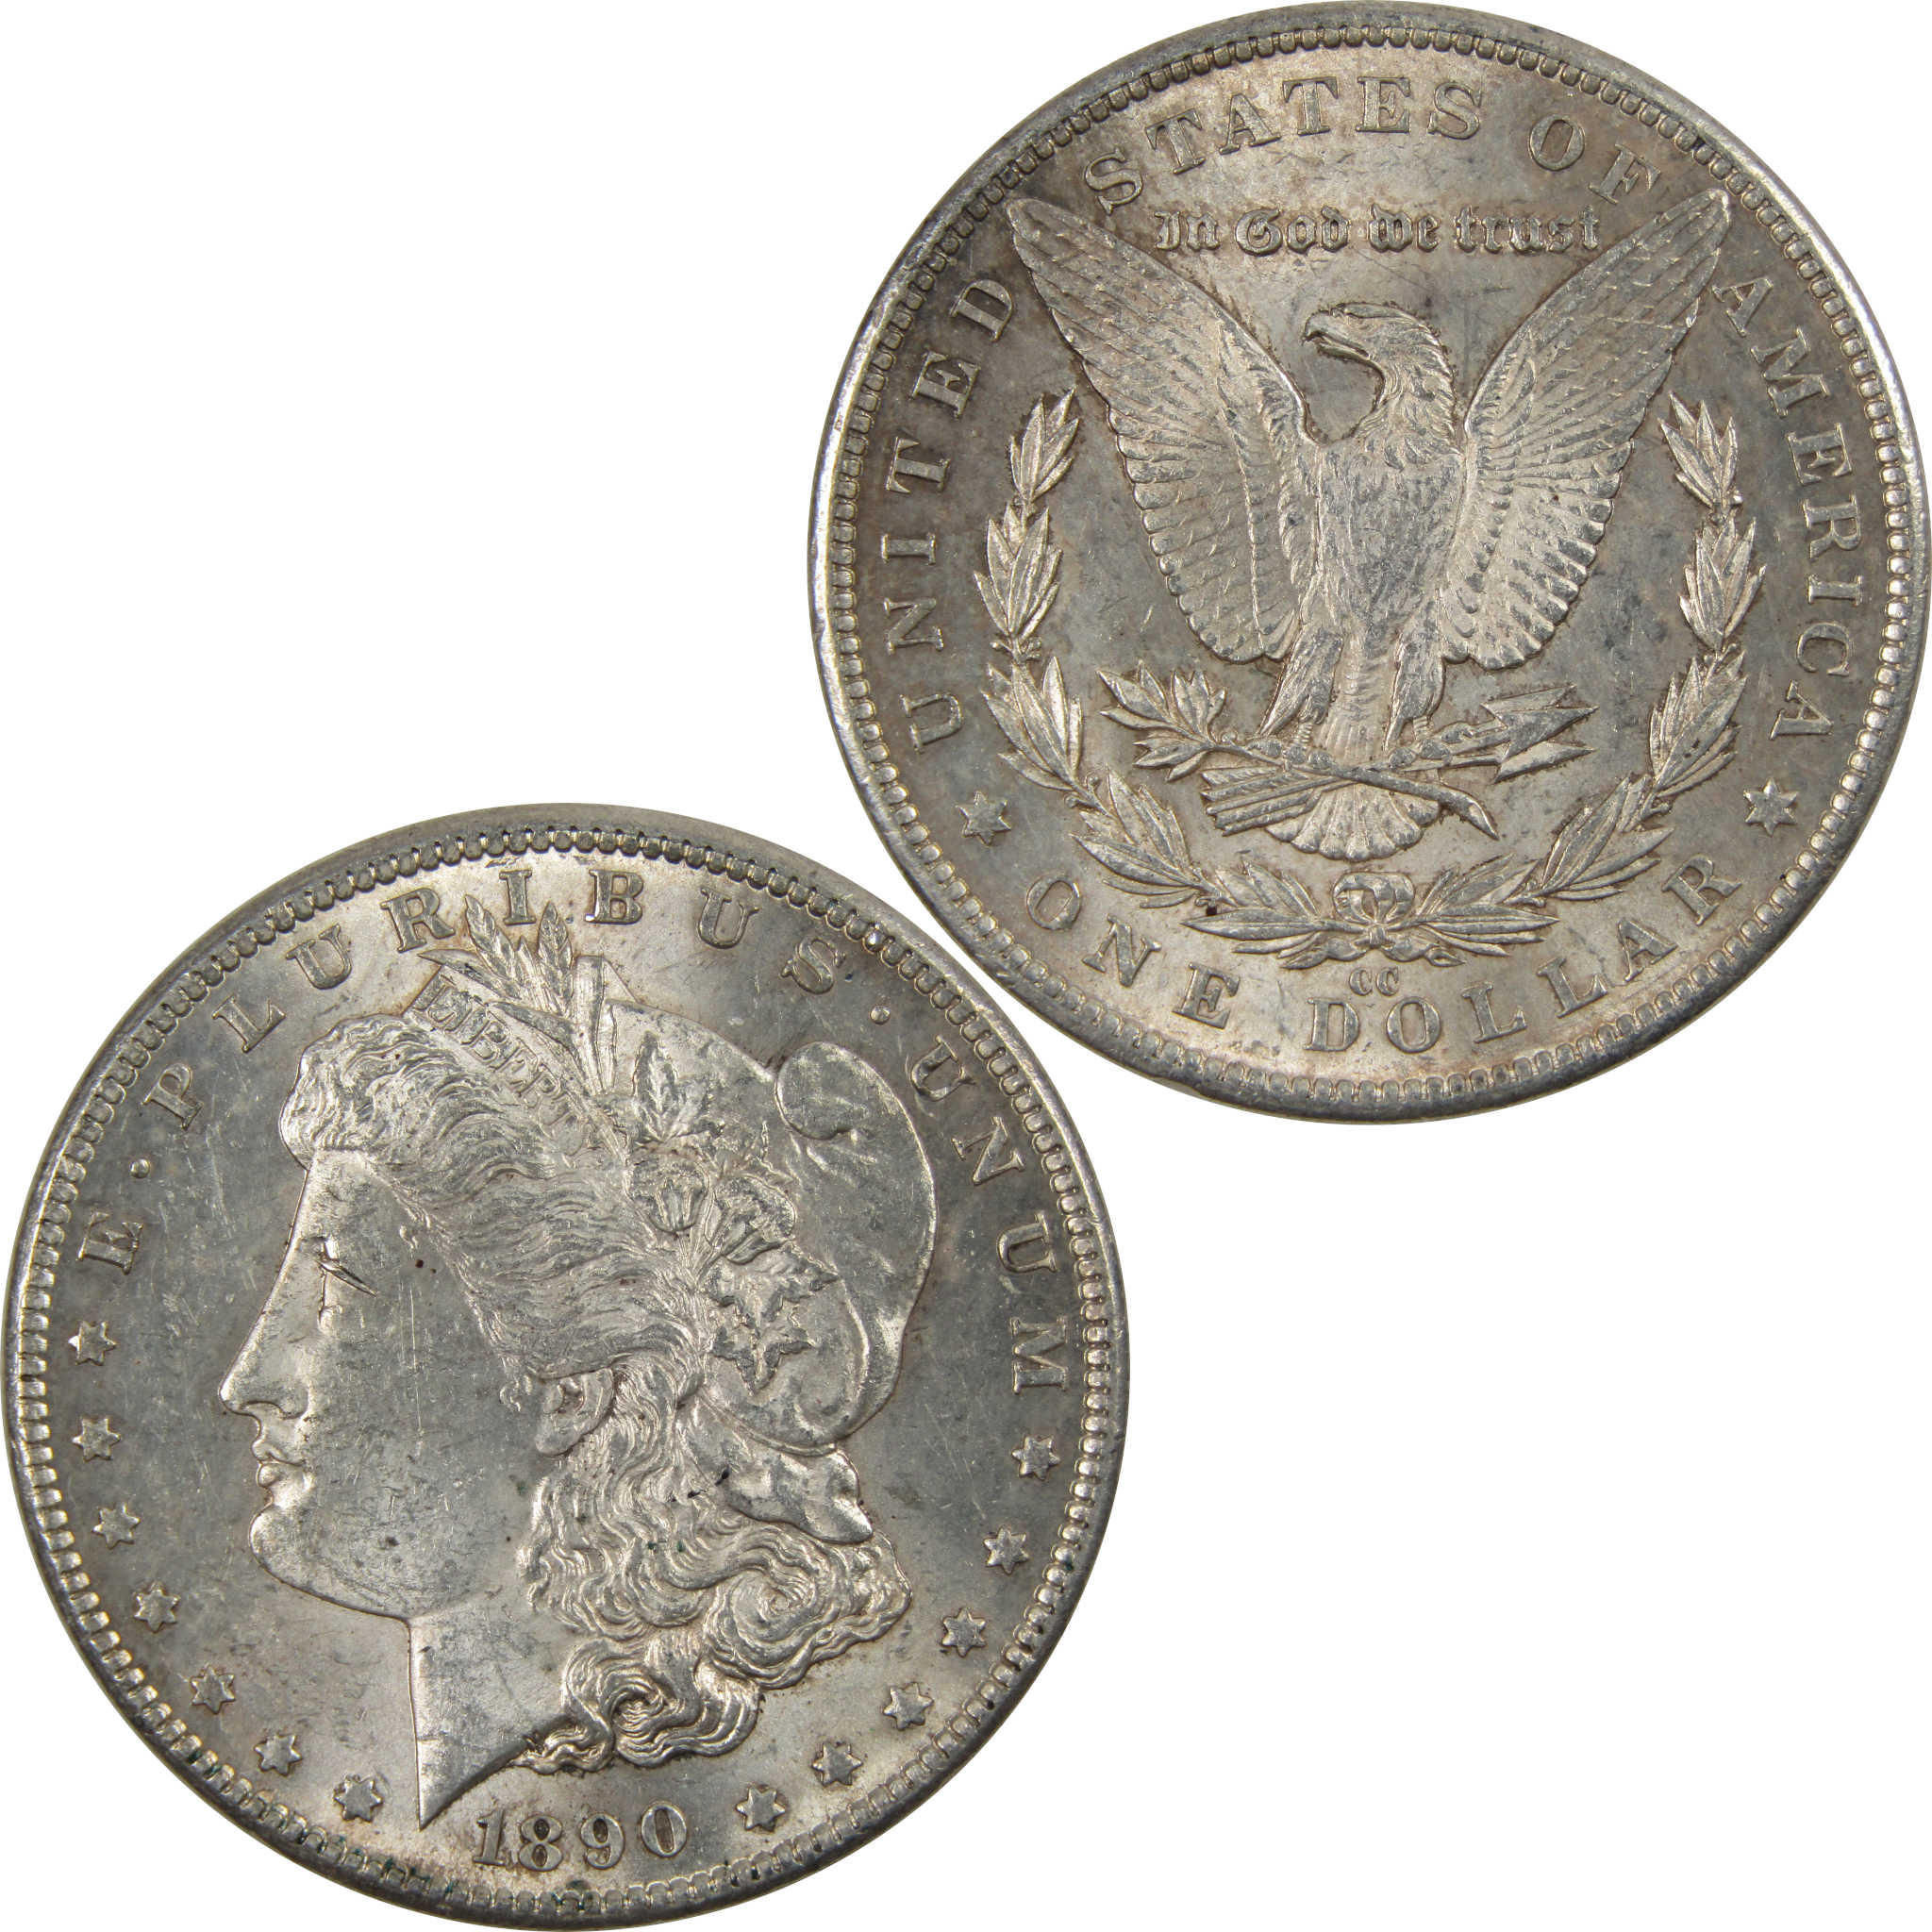 1890 CC Morgan Dollar BU Uncirculated Mint State Silver $1 SKU:I4360 - Morgan coin - Morgan silver dollar - Morgan silver dollar for sale - Profile Coins &amp; Collectibles